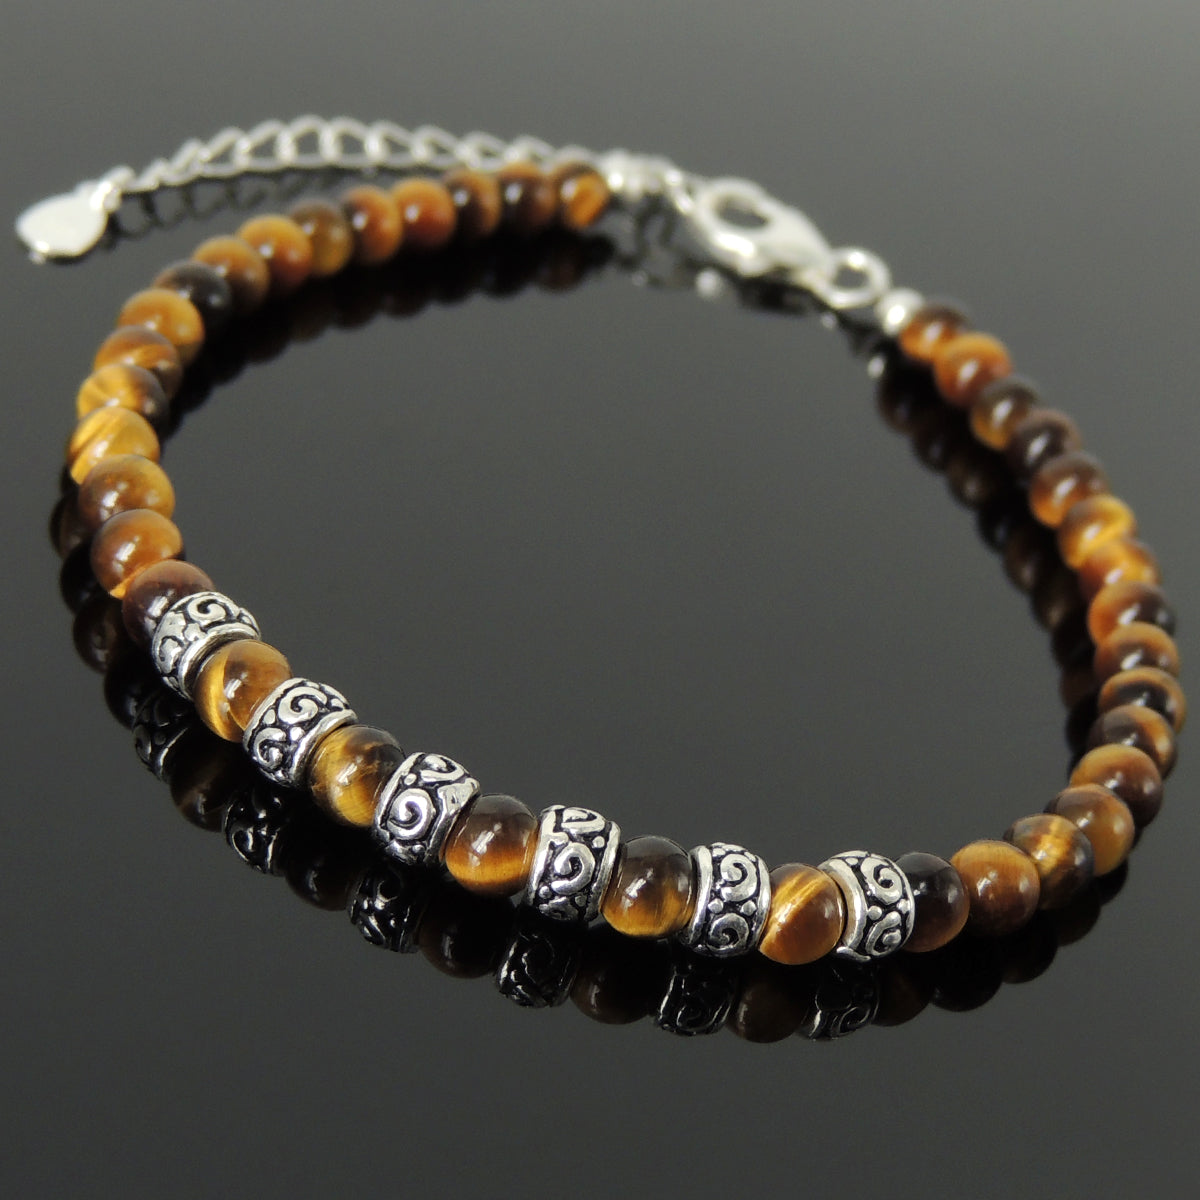 4mm Brown Tiger Eye Healing Gemstone Bracelet with S925 Sterling Silver Barrel Beads, Chain, & Clasp - Handmade by Gem & Silver BR1318